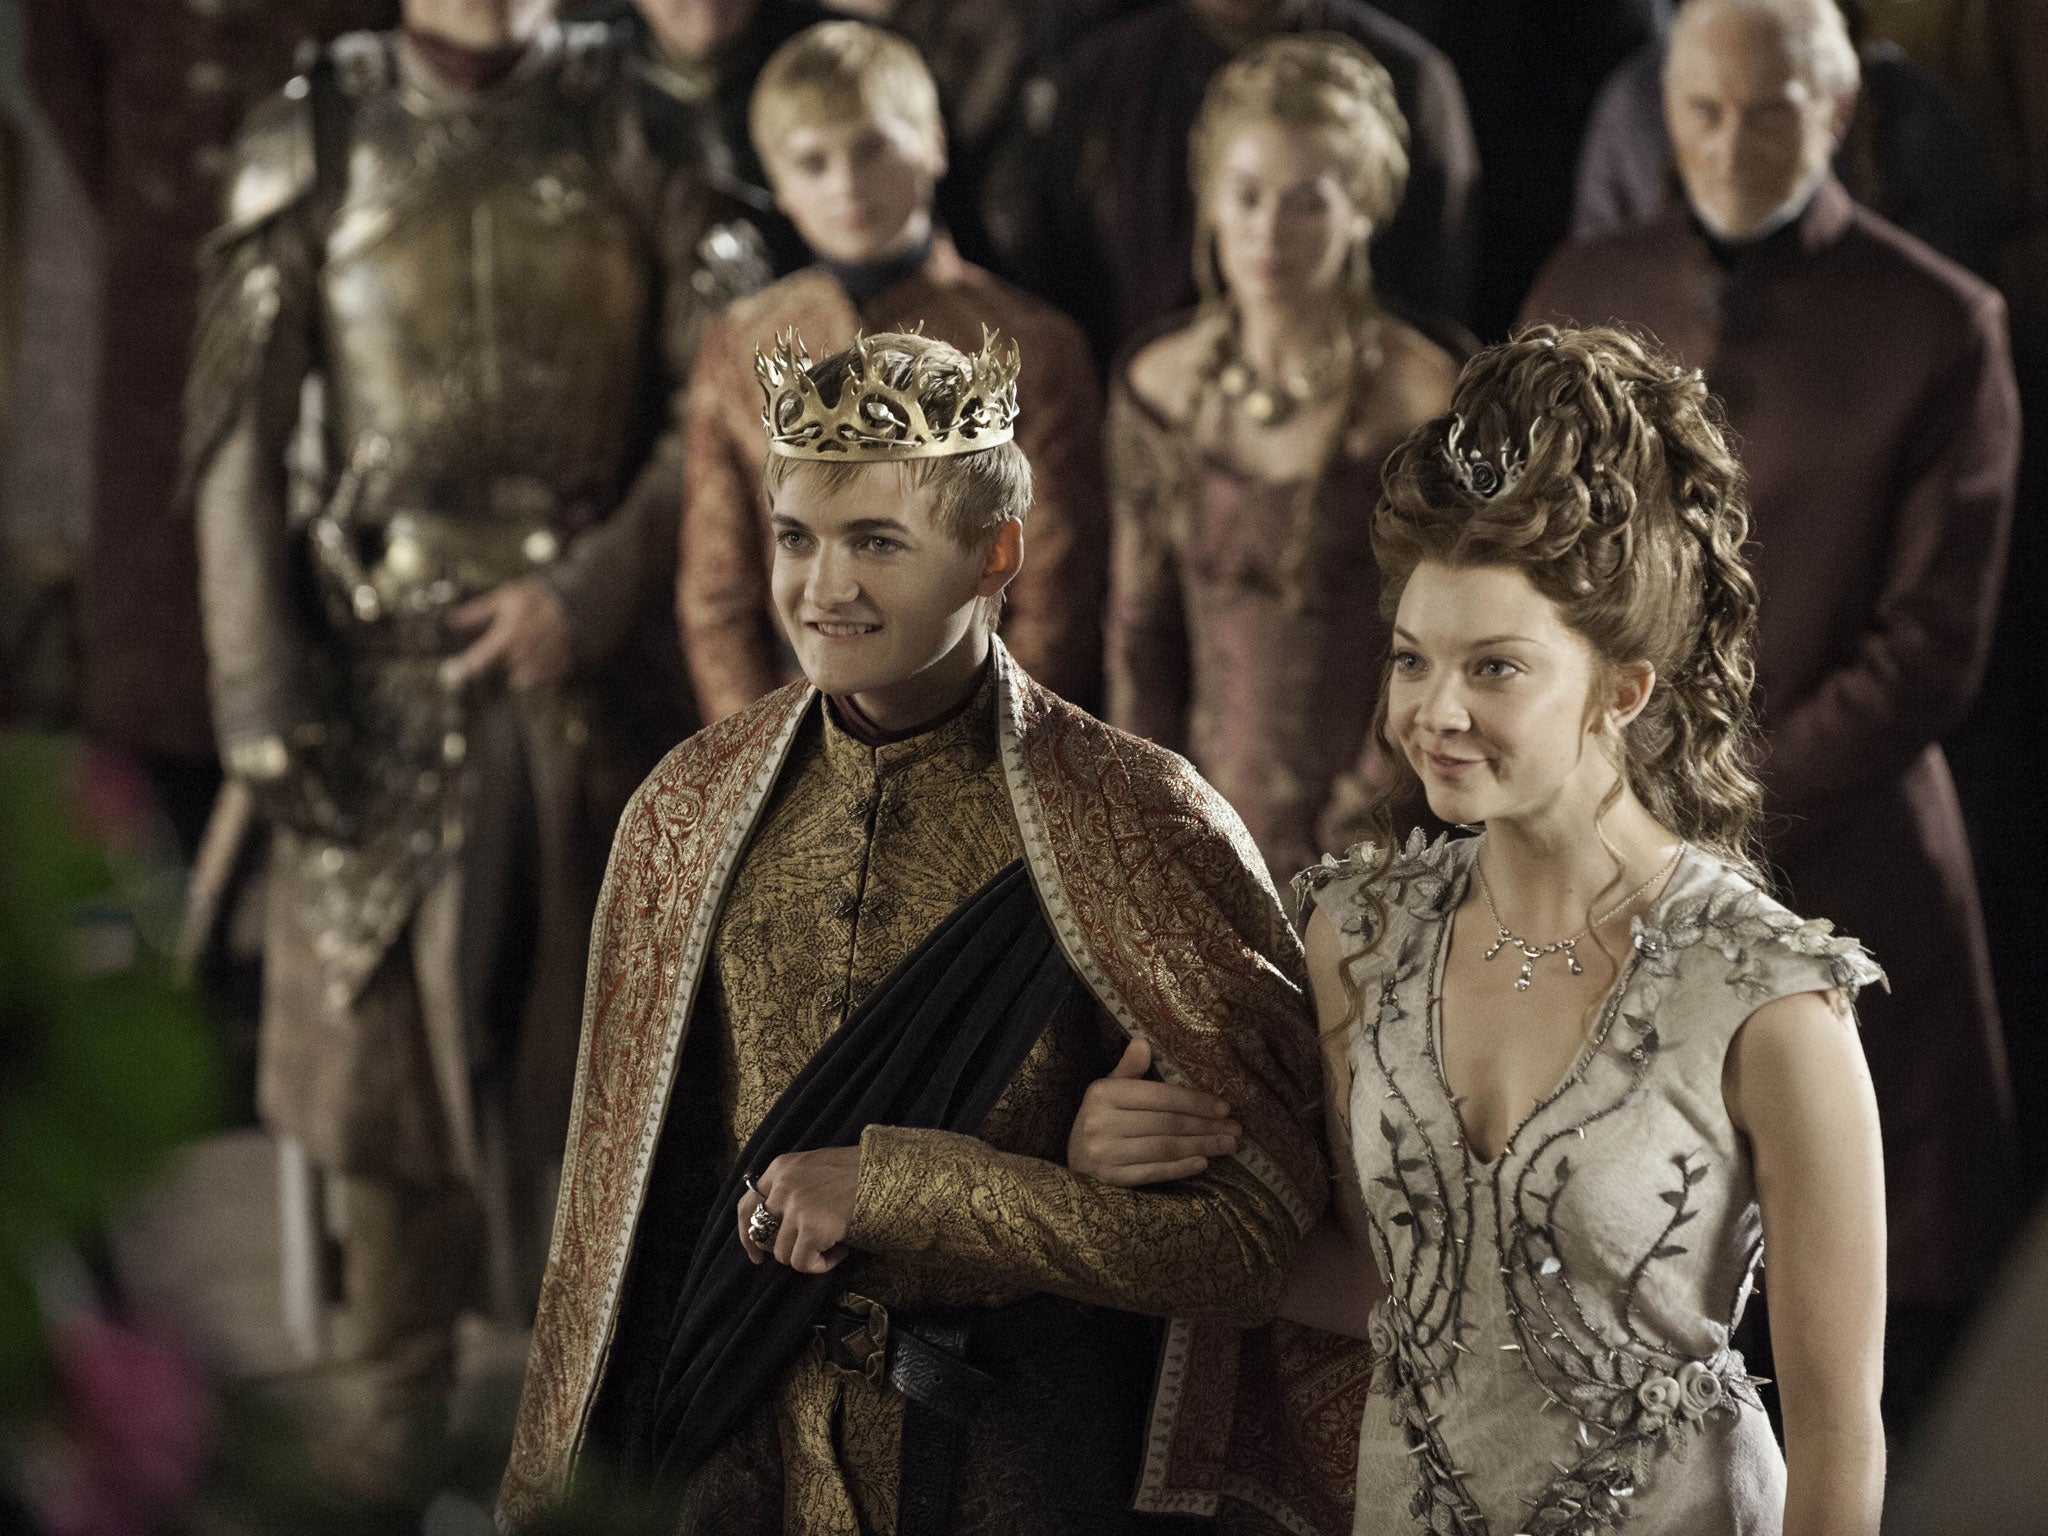 Game of Thrones has been nominated for an impressive 19 Emmy Awards